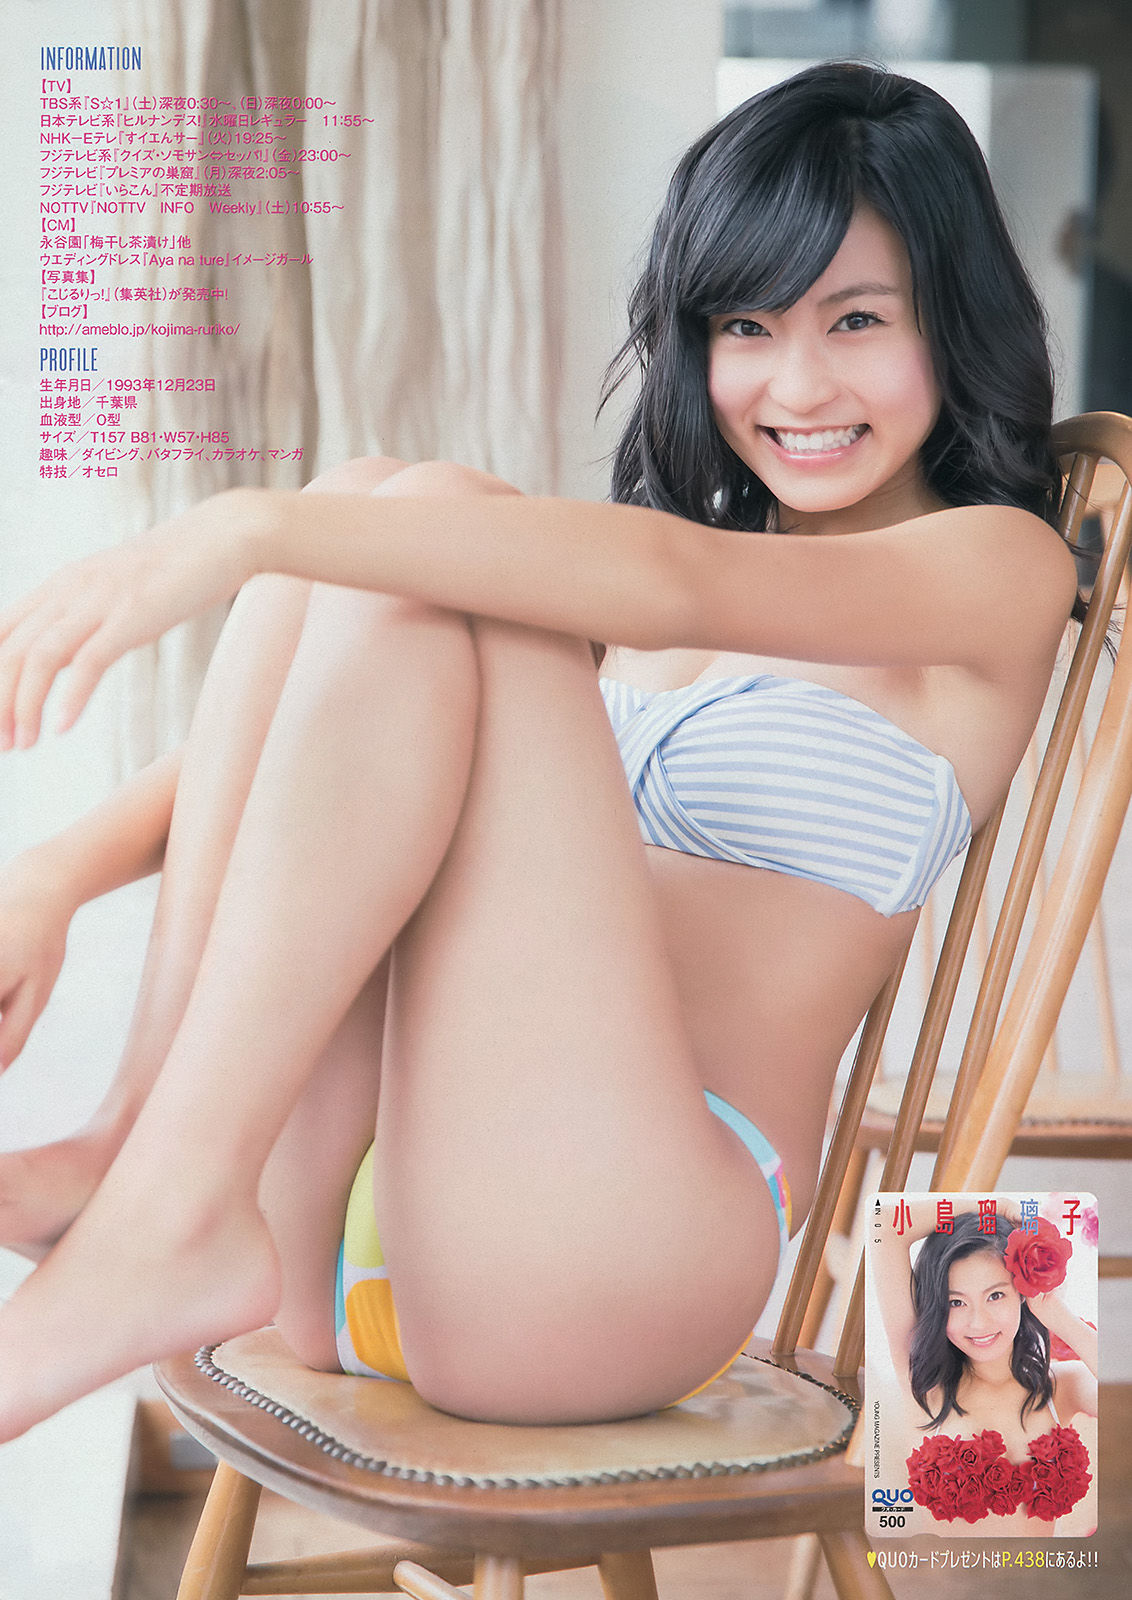 [Young Magazine] 2014年No.11 小島瑠璃子 宮城舞